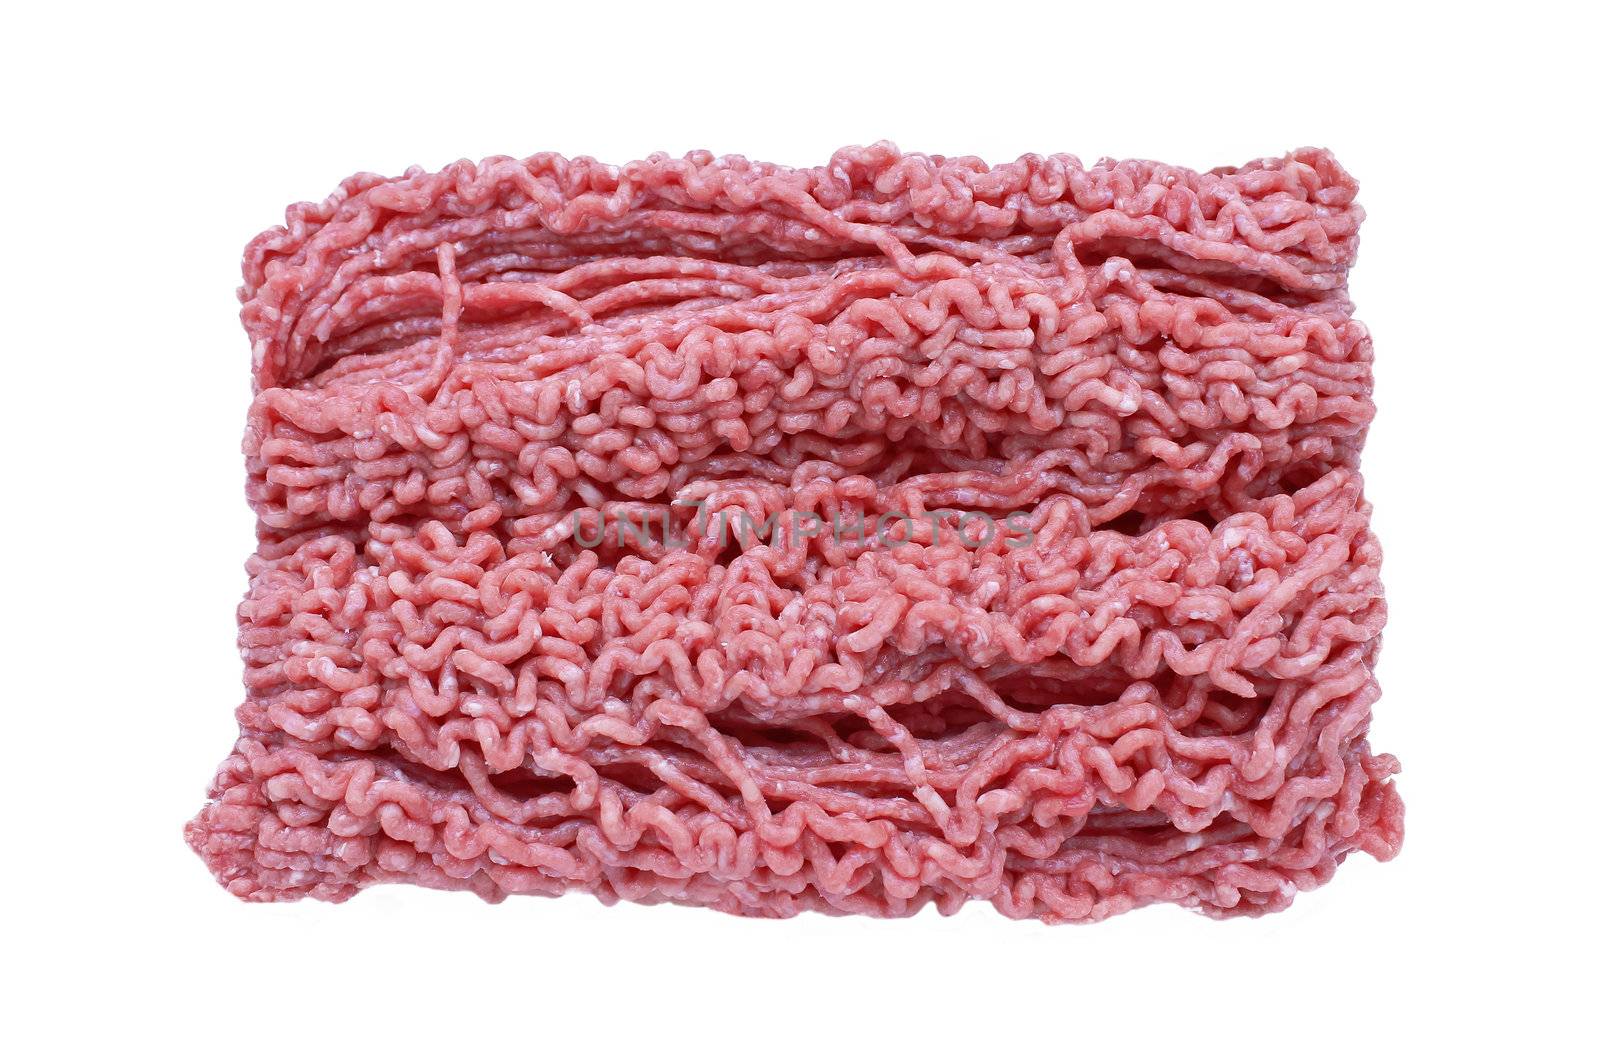 Minced meat on white background by NickNick